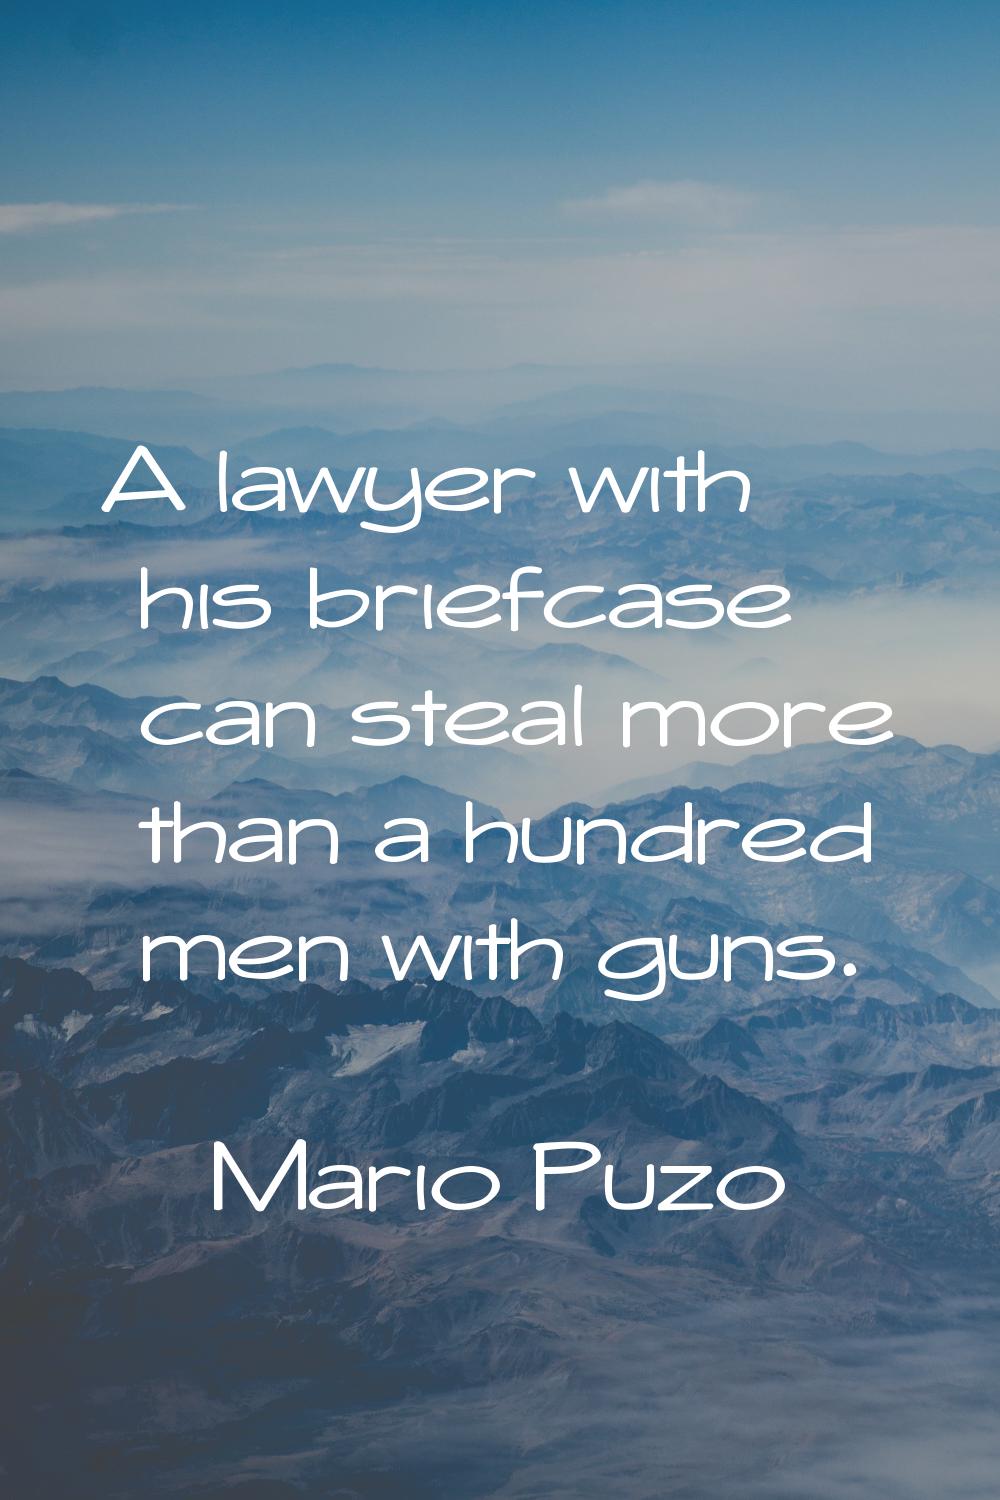 A lawyer with his briefcase can steal more than a hundred men with guns.